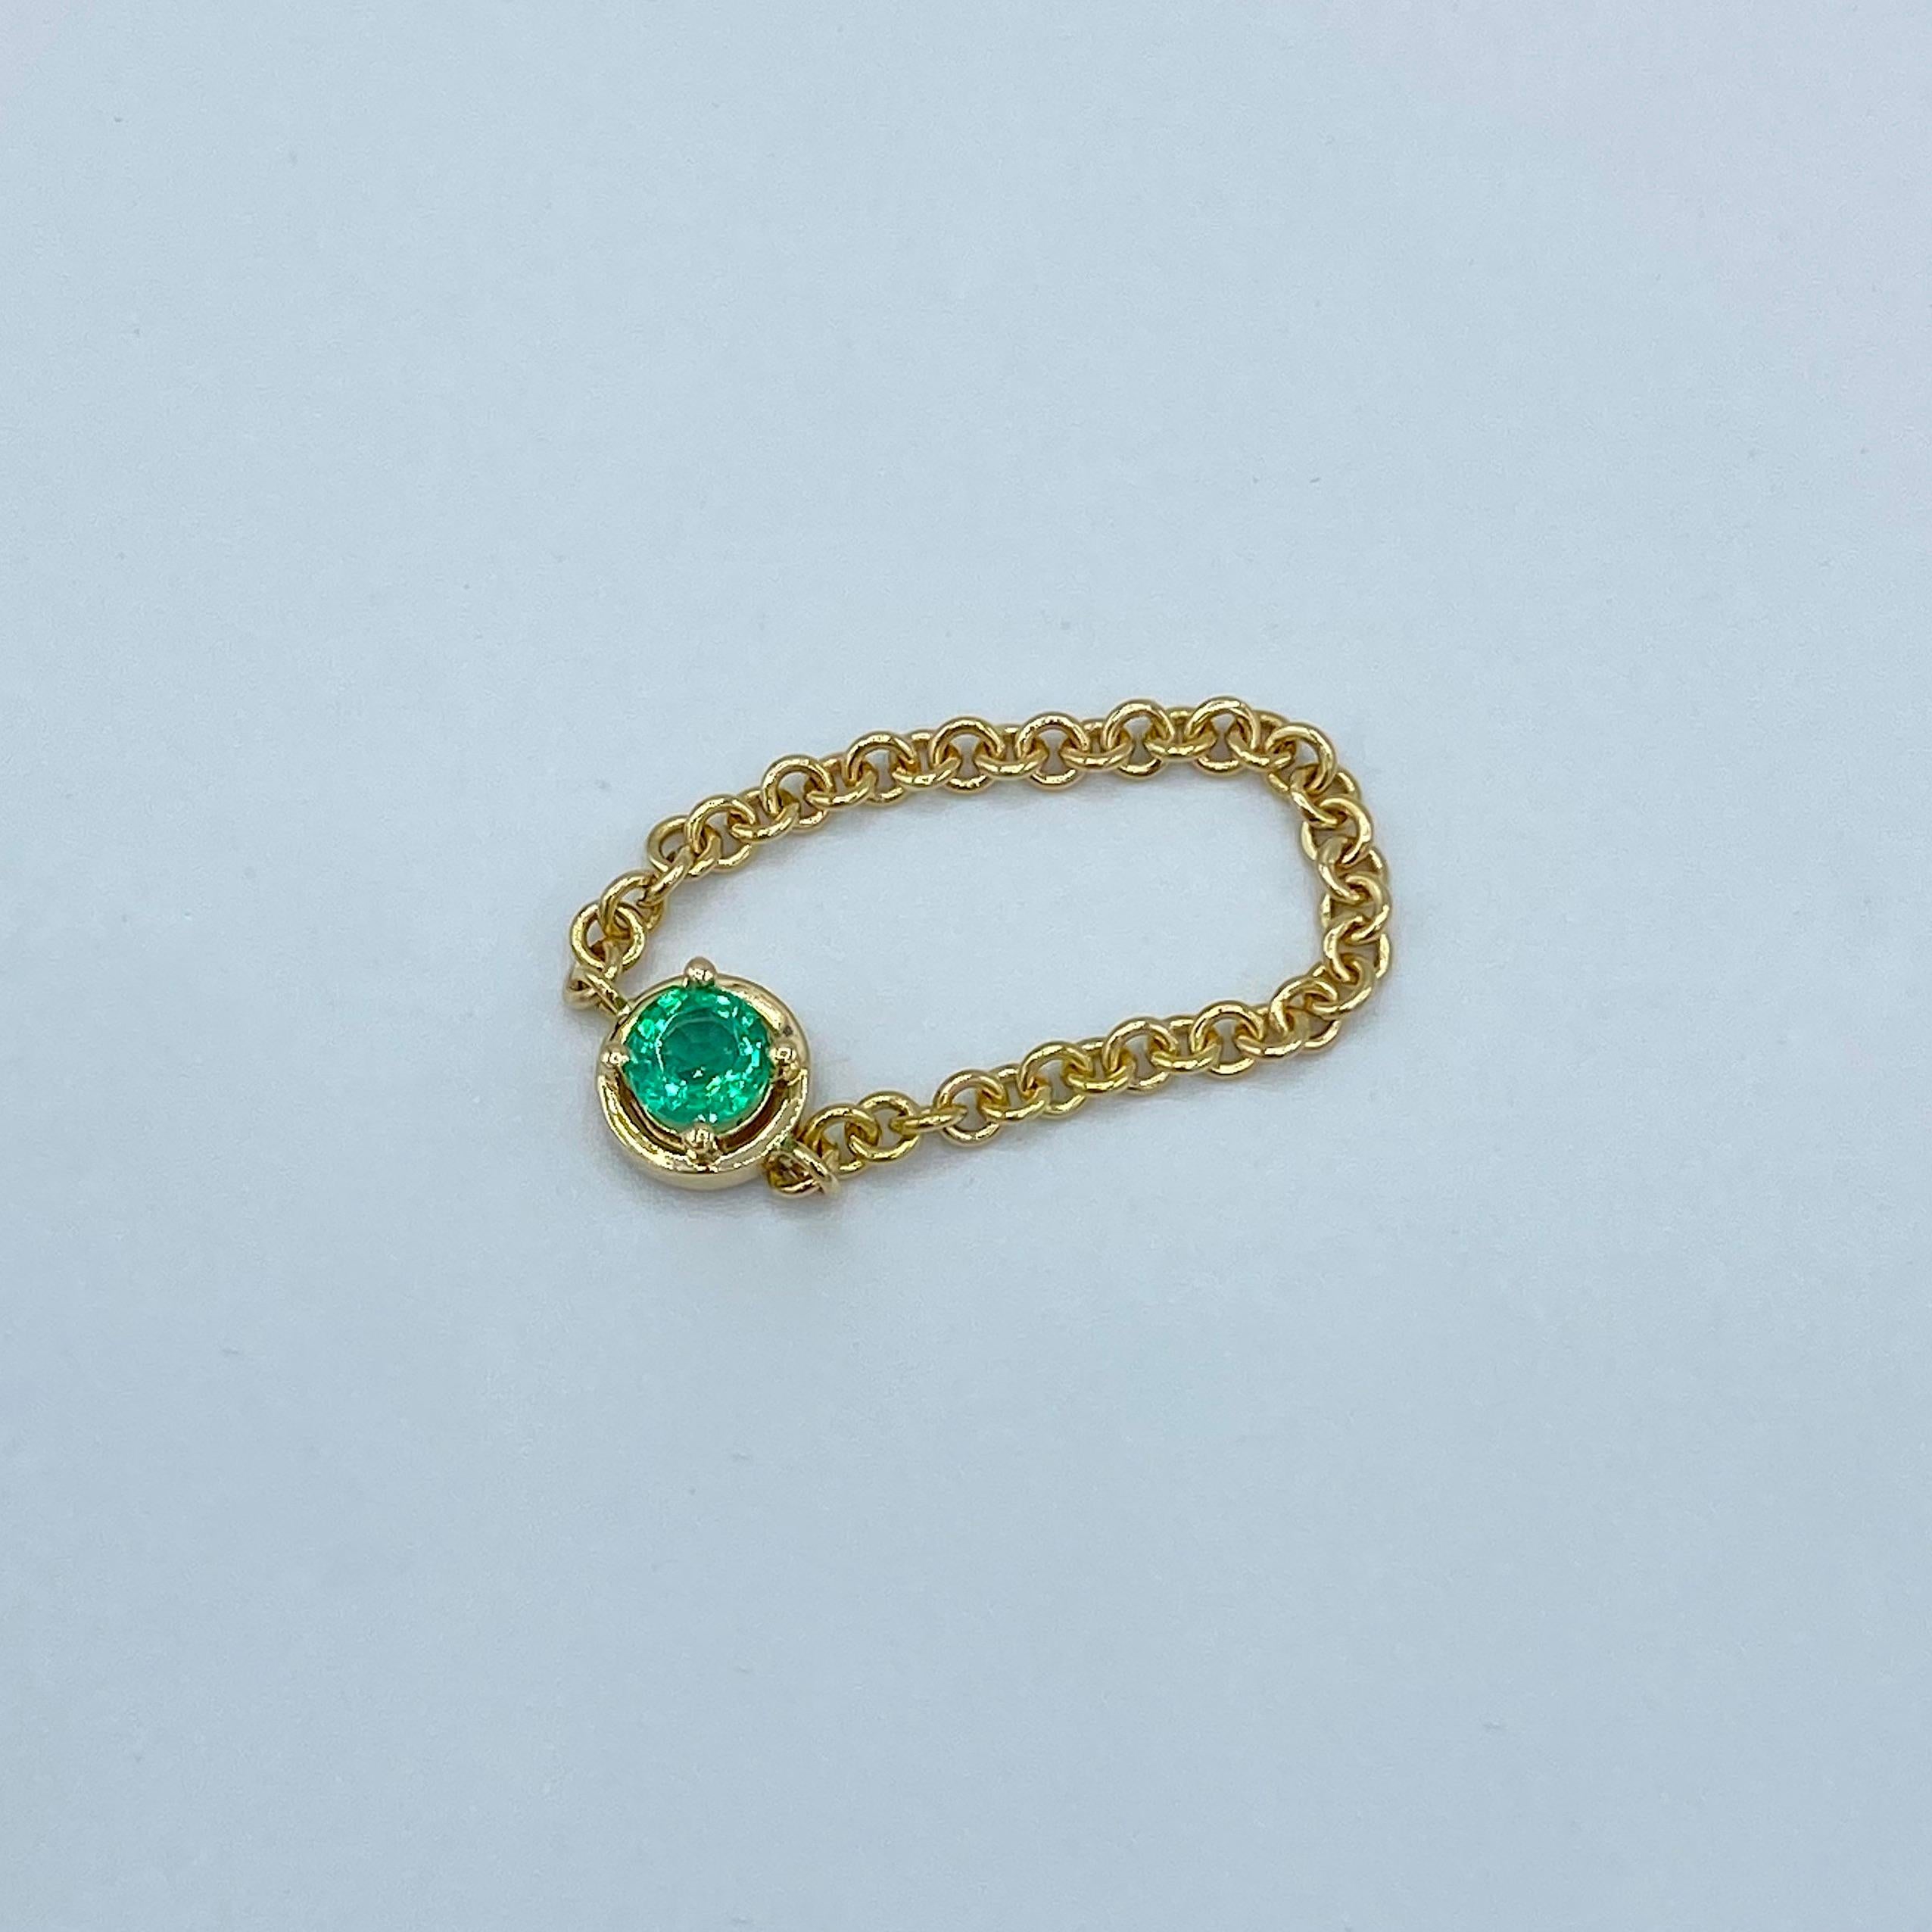 This ring is one of the first pieces of the new color line.
The completely handmade shank is an 18kt yellow gold chain, which attaches to the central griff with a 4mm emerald set.
It can be worn together with other identical rings with different